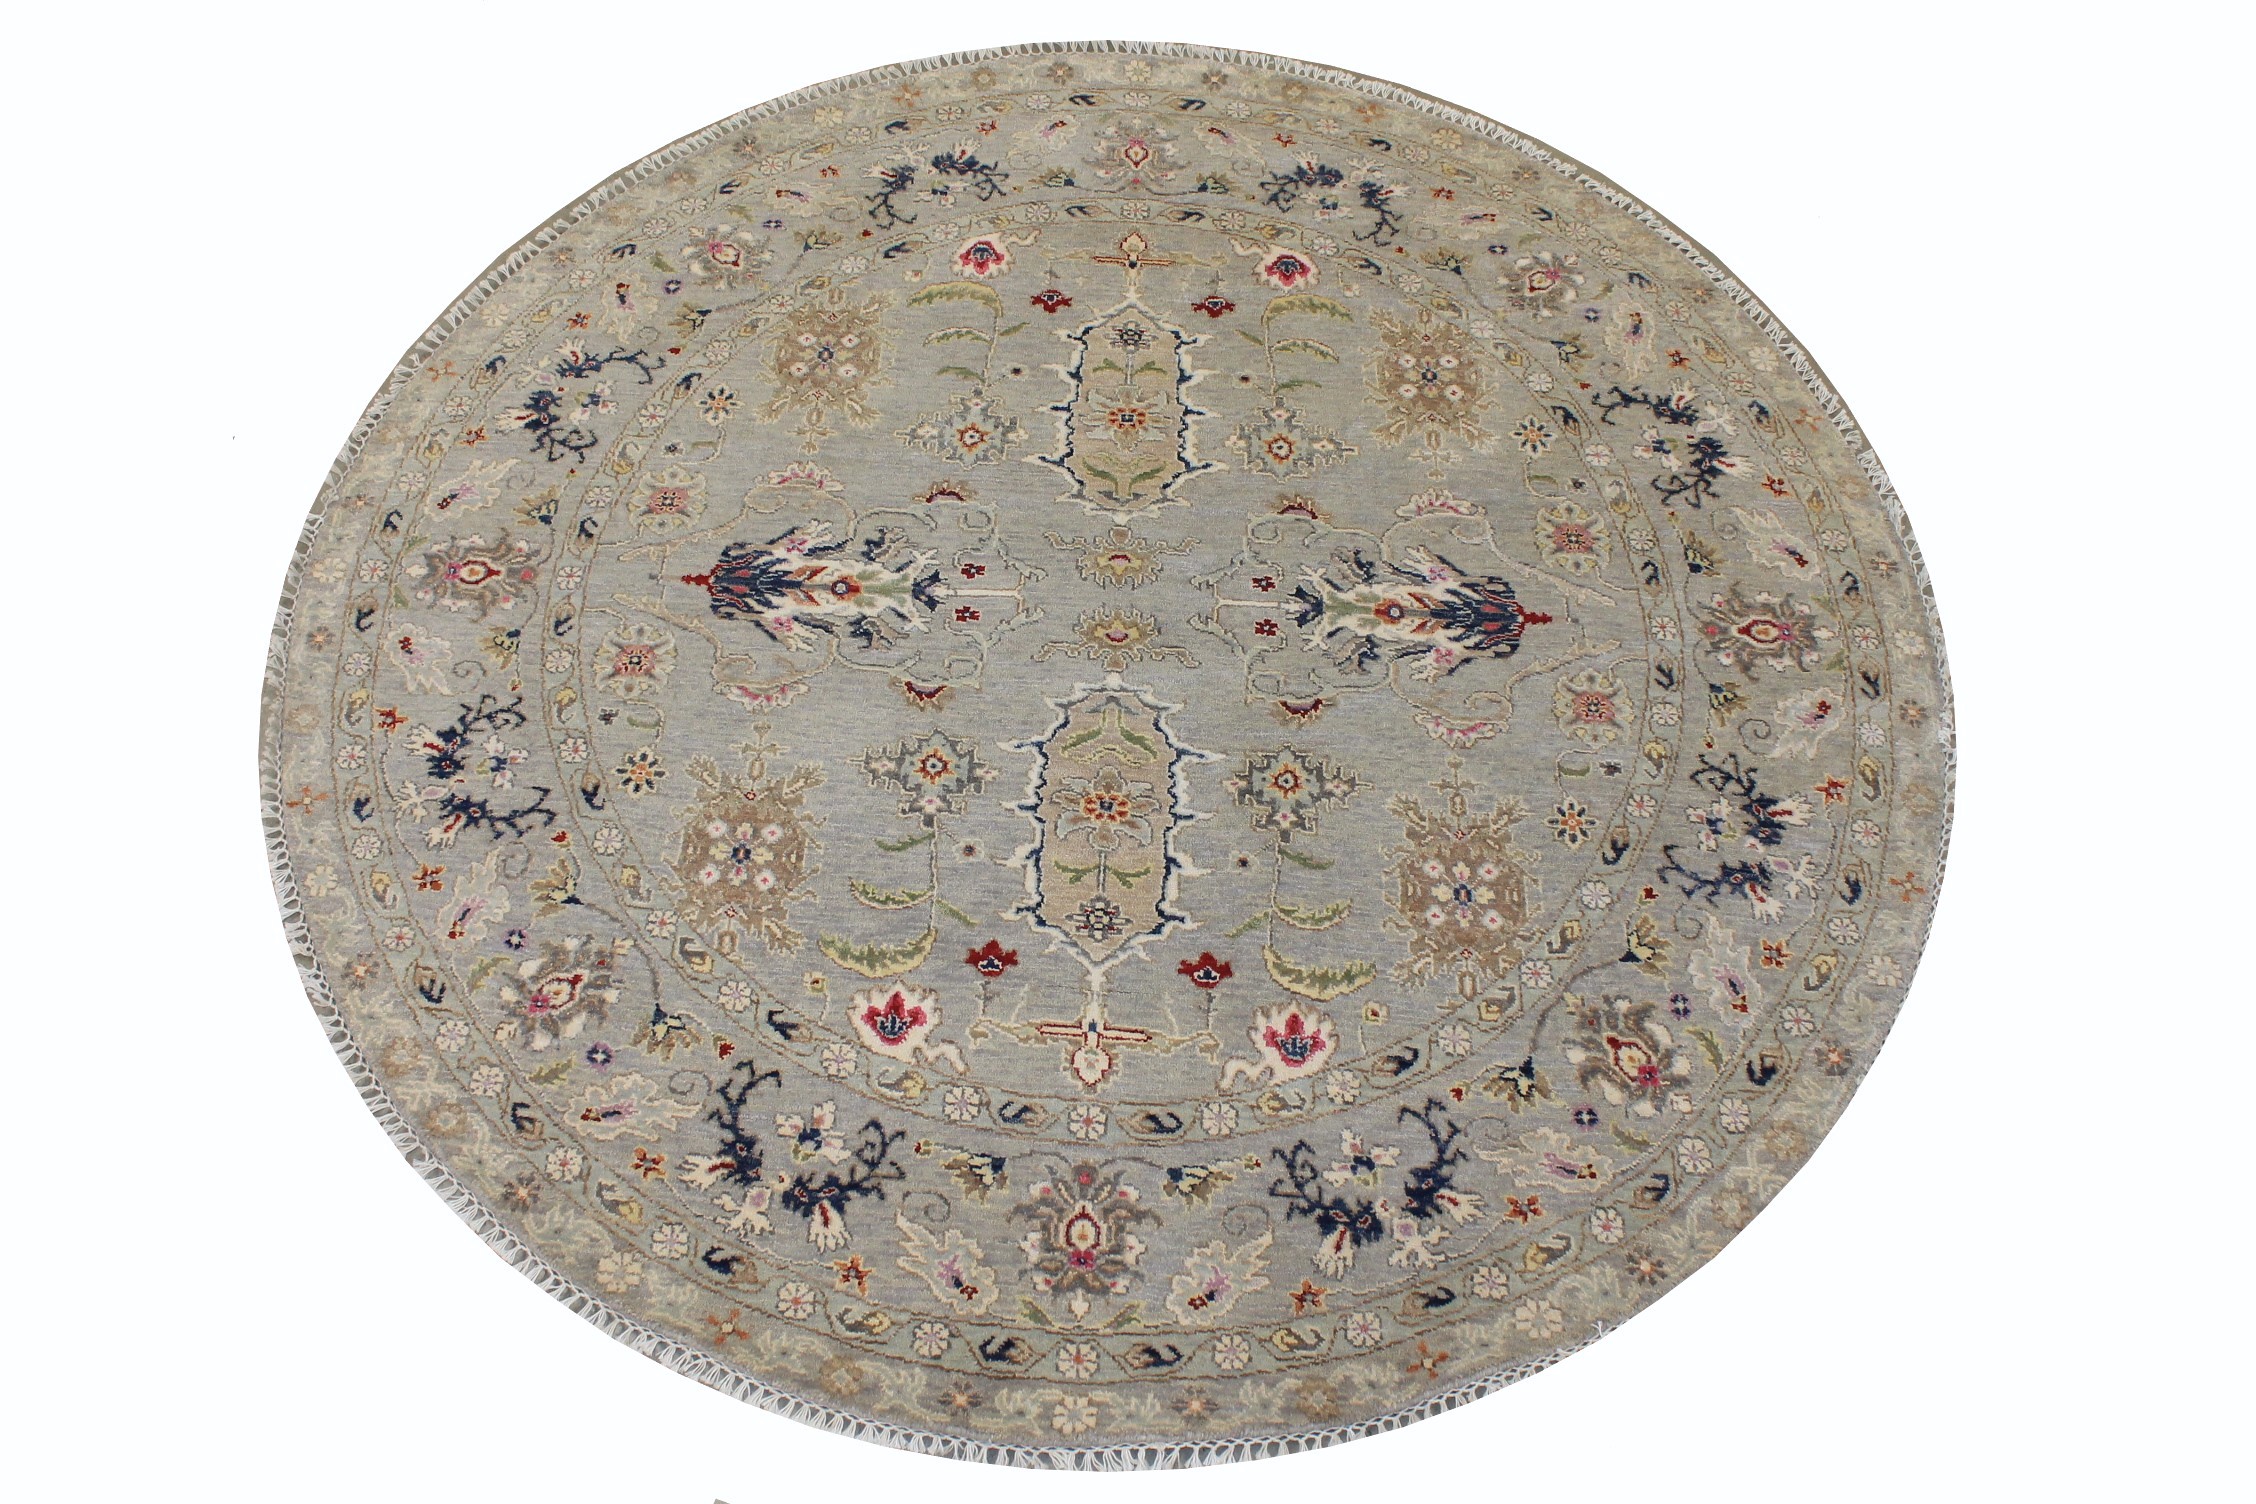 6 ft. - 7 ft. Round & Square Traditional Hand Knotted Wool Area Rug - MR028216